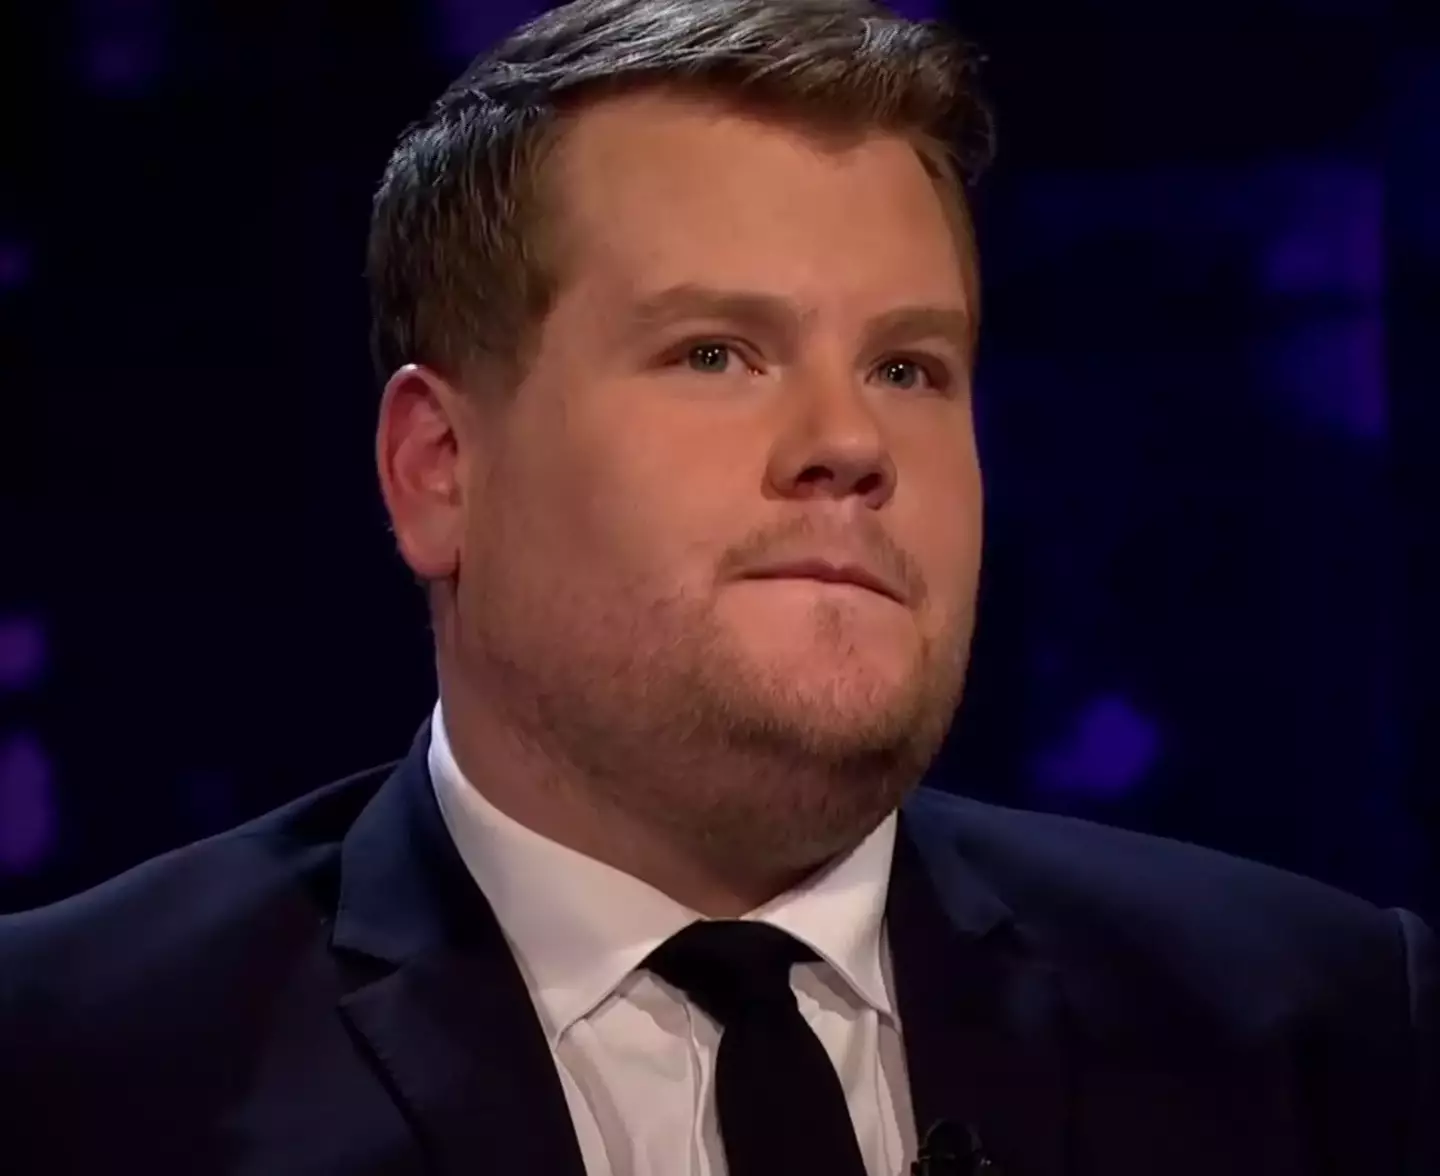 James Corden seemed taken aback when he learned that his mate said no to the interview.